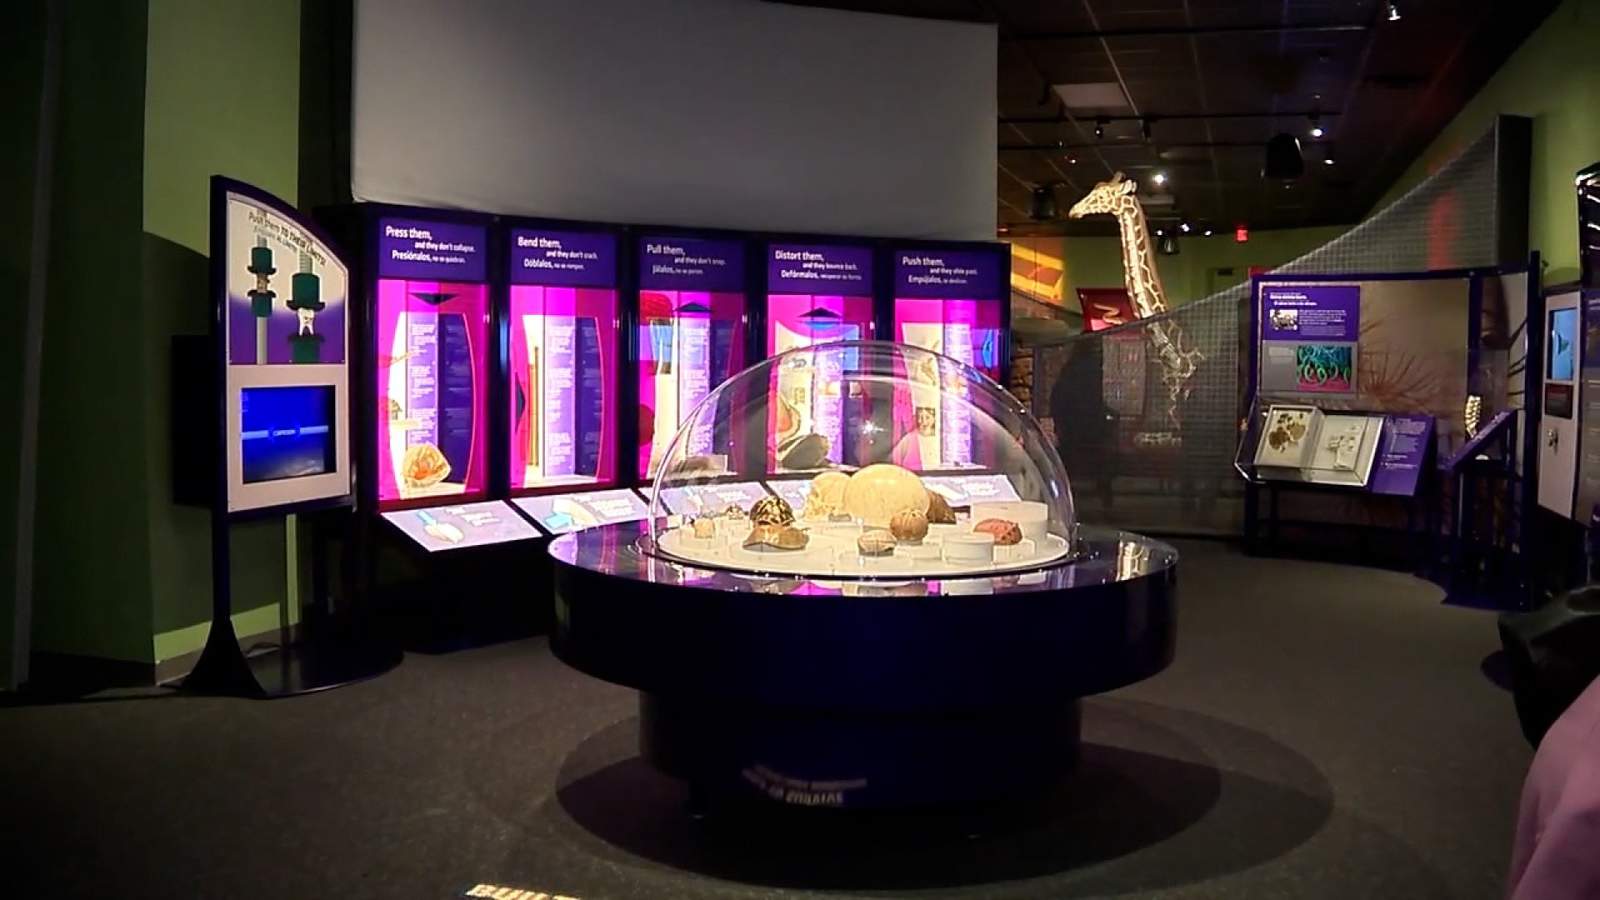 Witte Museum unveils first traveling exhibit of 2021 ‘The Machine Inside: Biomechanics’